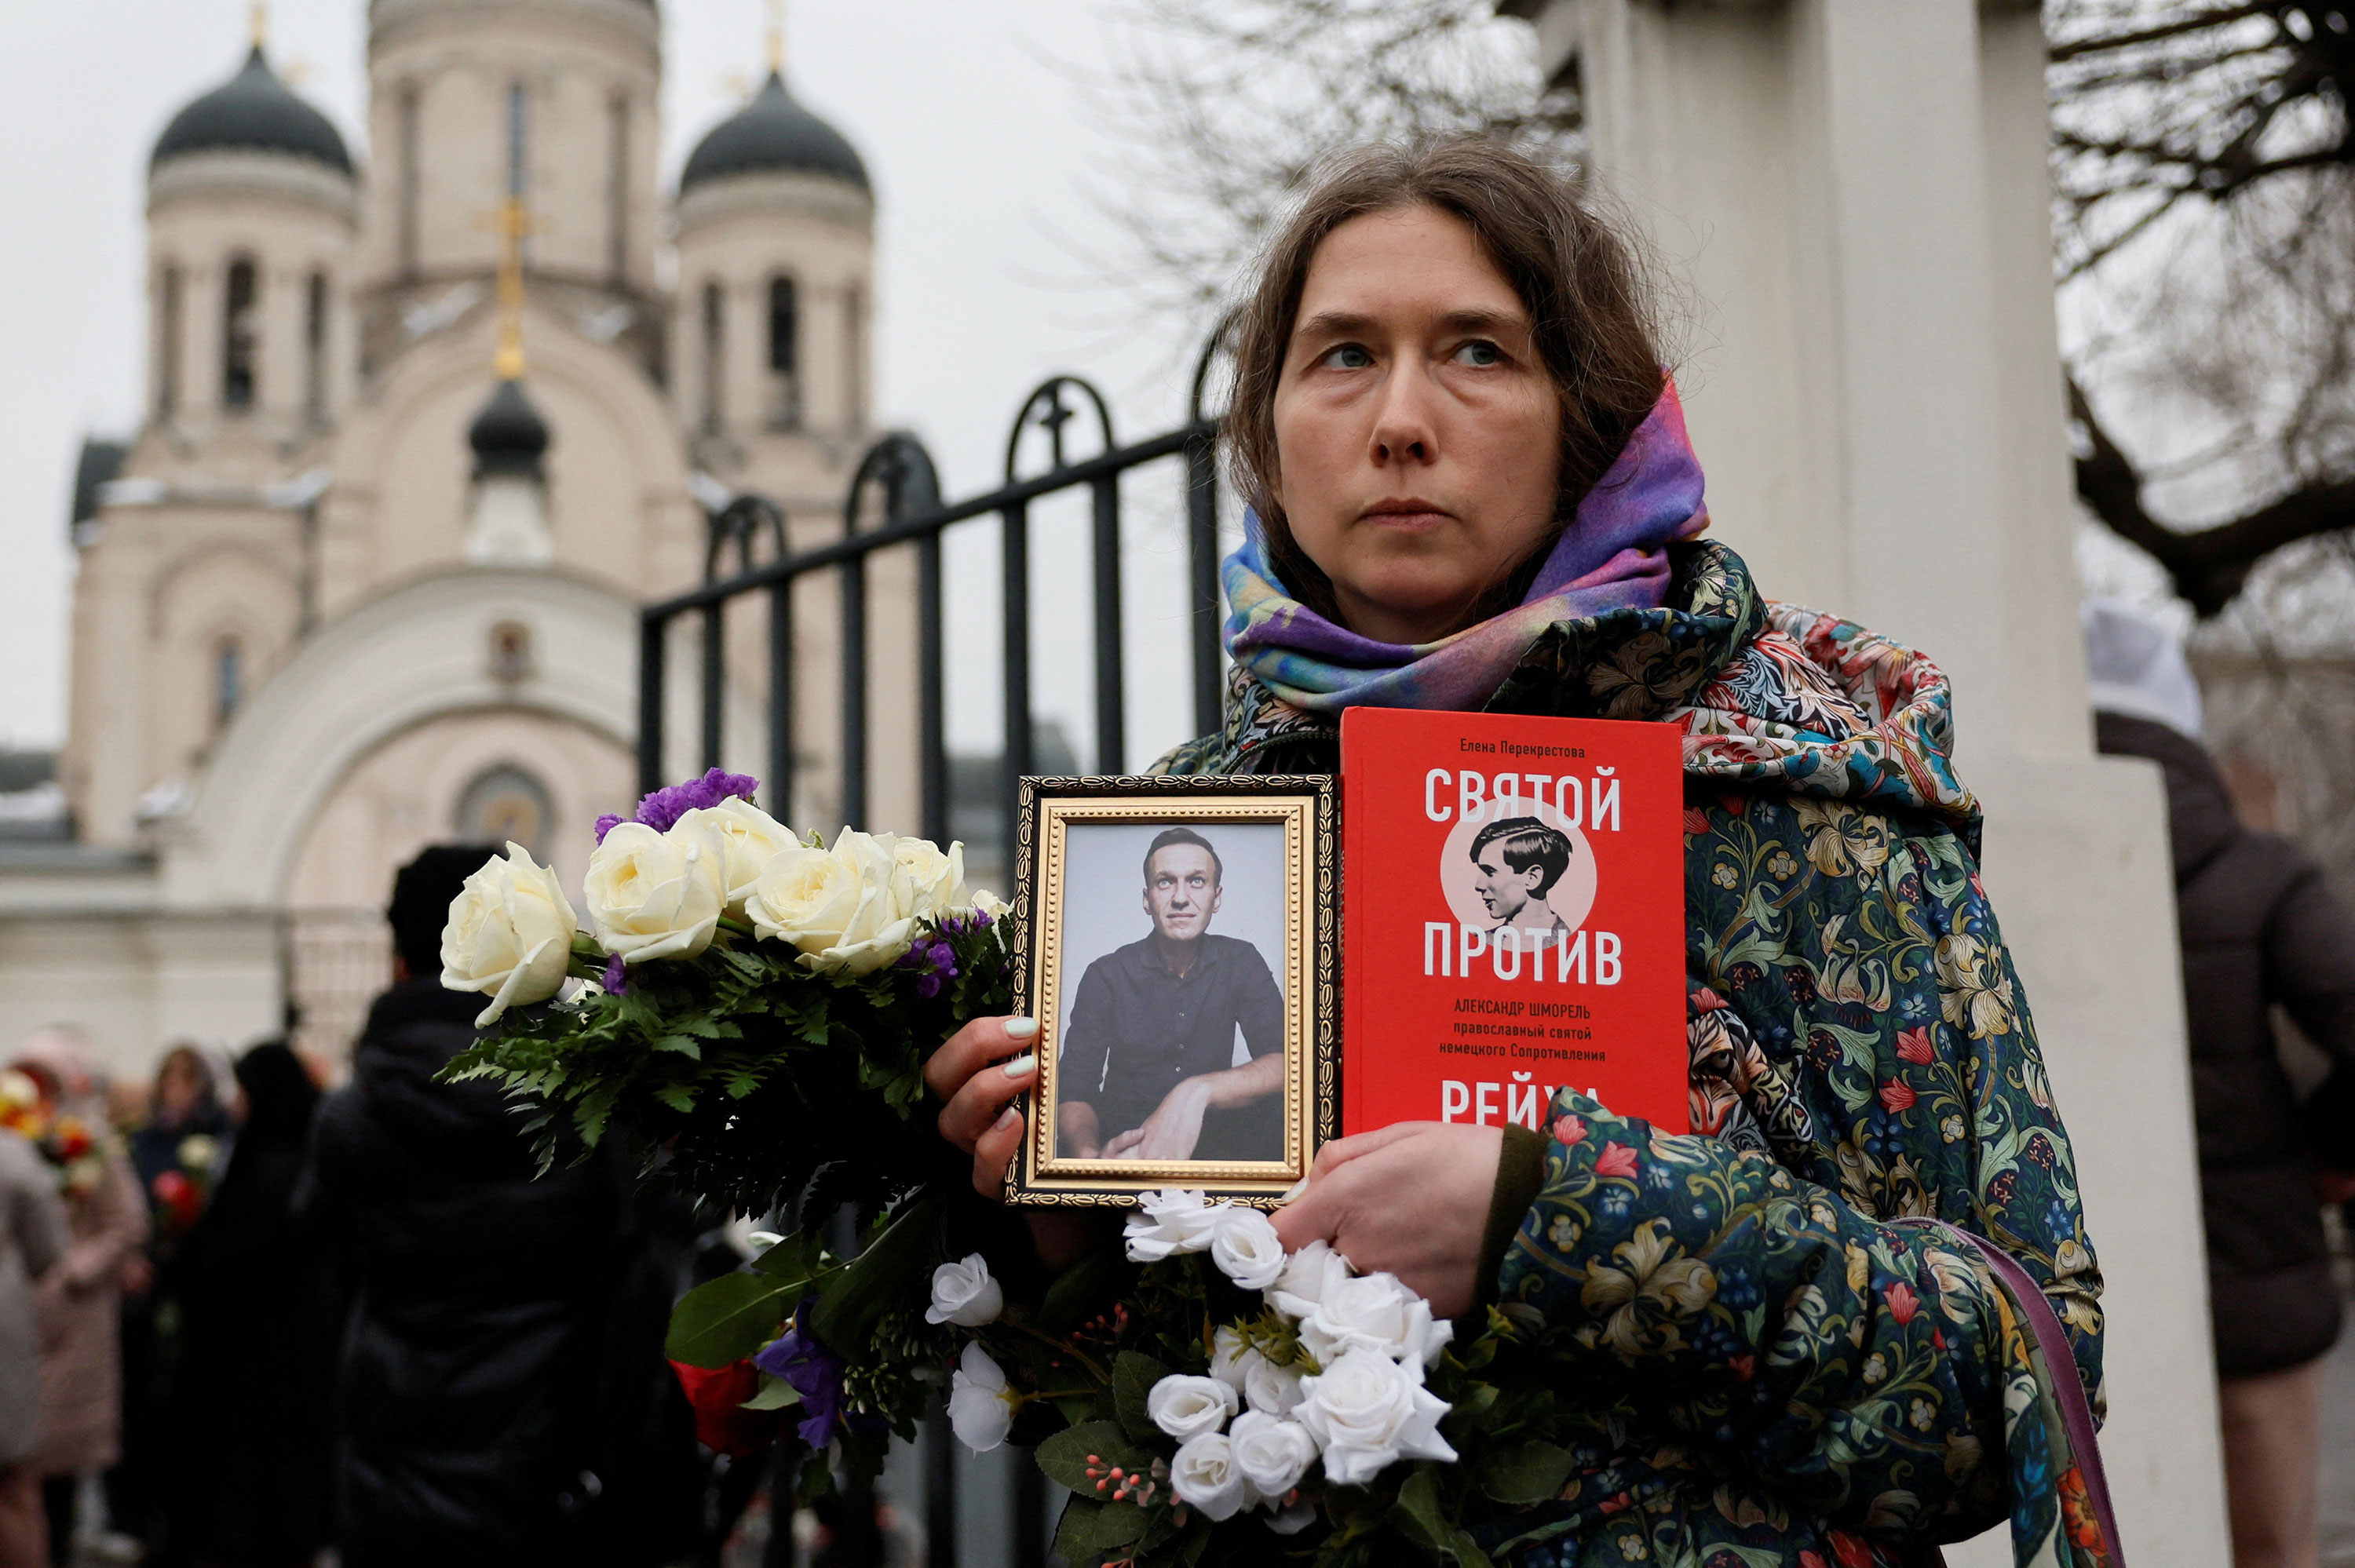 A person holds Navalny's portrait outside the church after the funeral service.